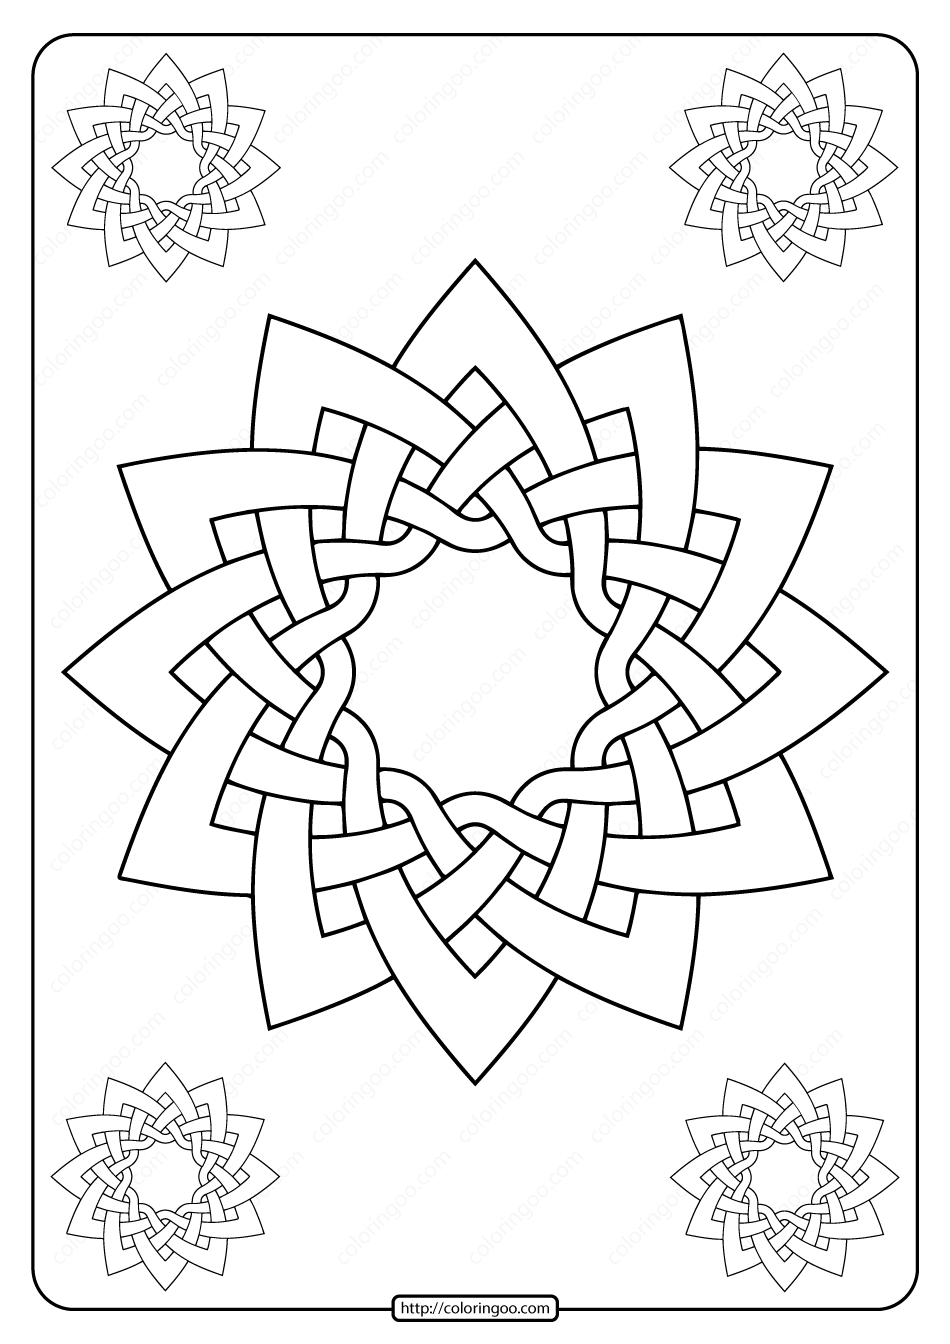 celtic knot work dodeca by Peter Mulkers